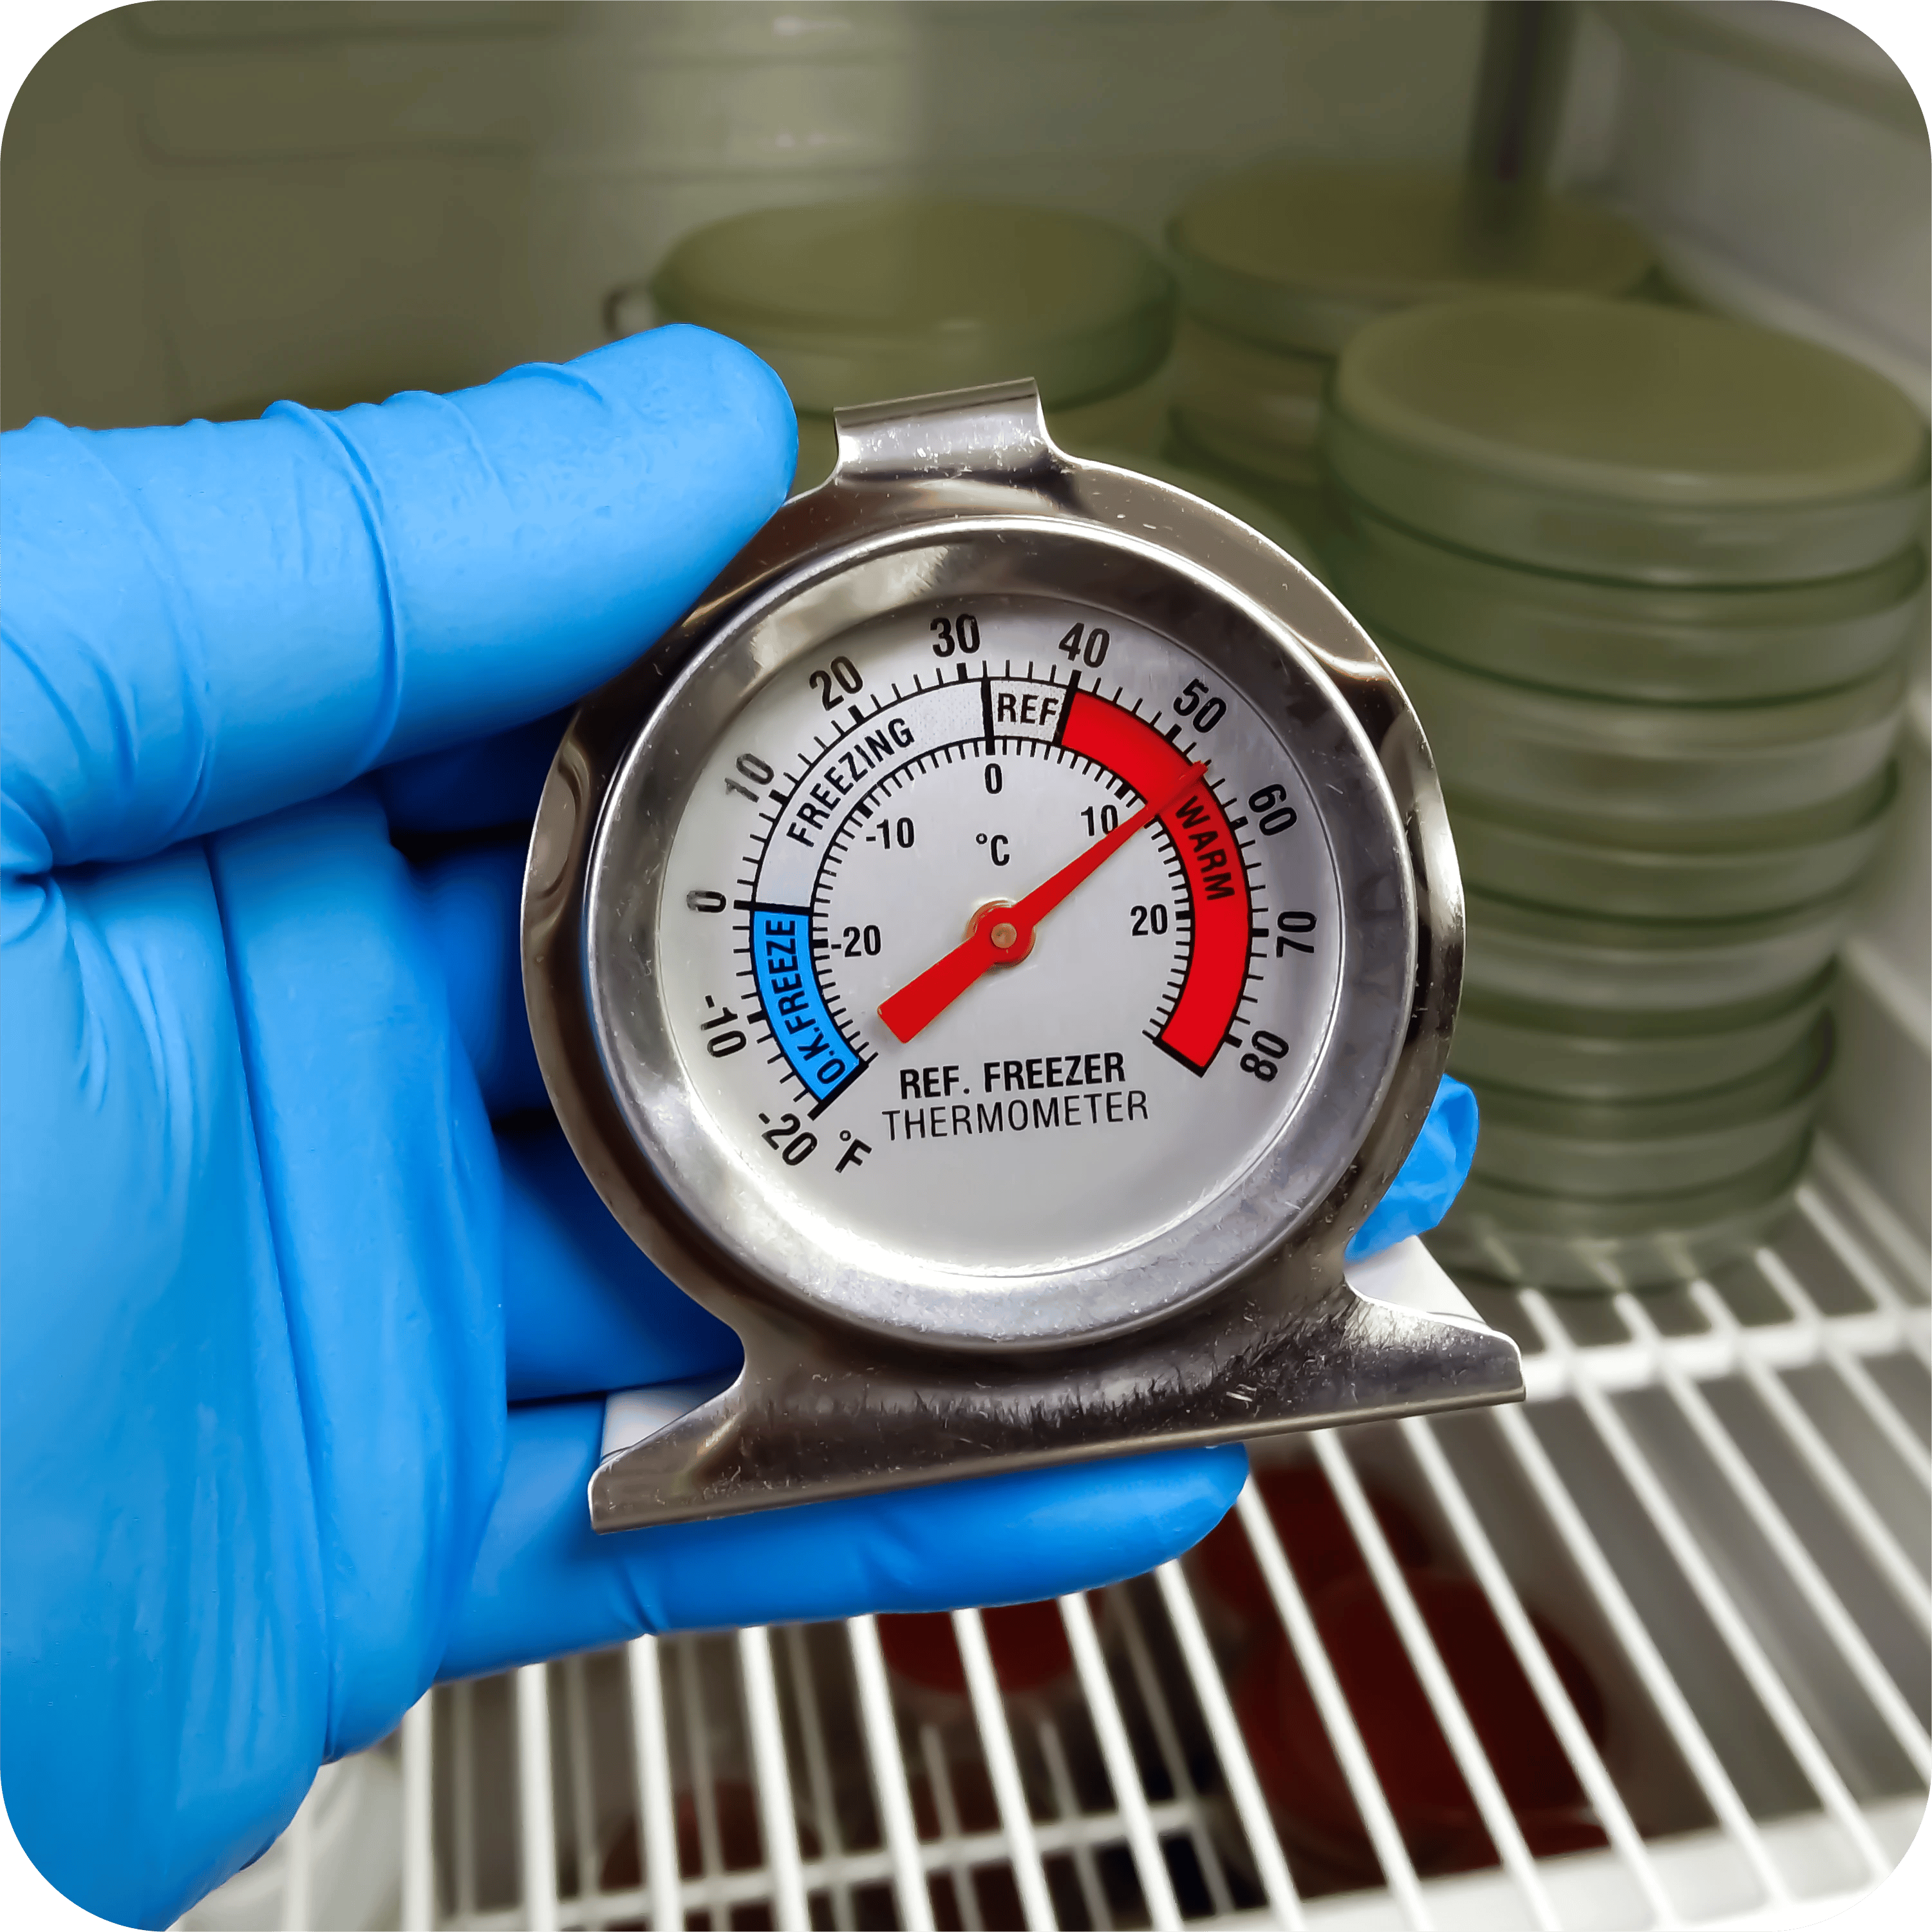 use cold chain monitoring systems to monitor the temperature of sensitive food]